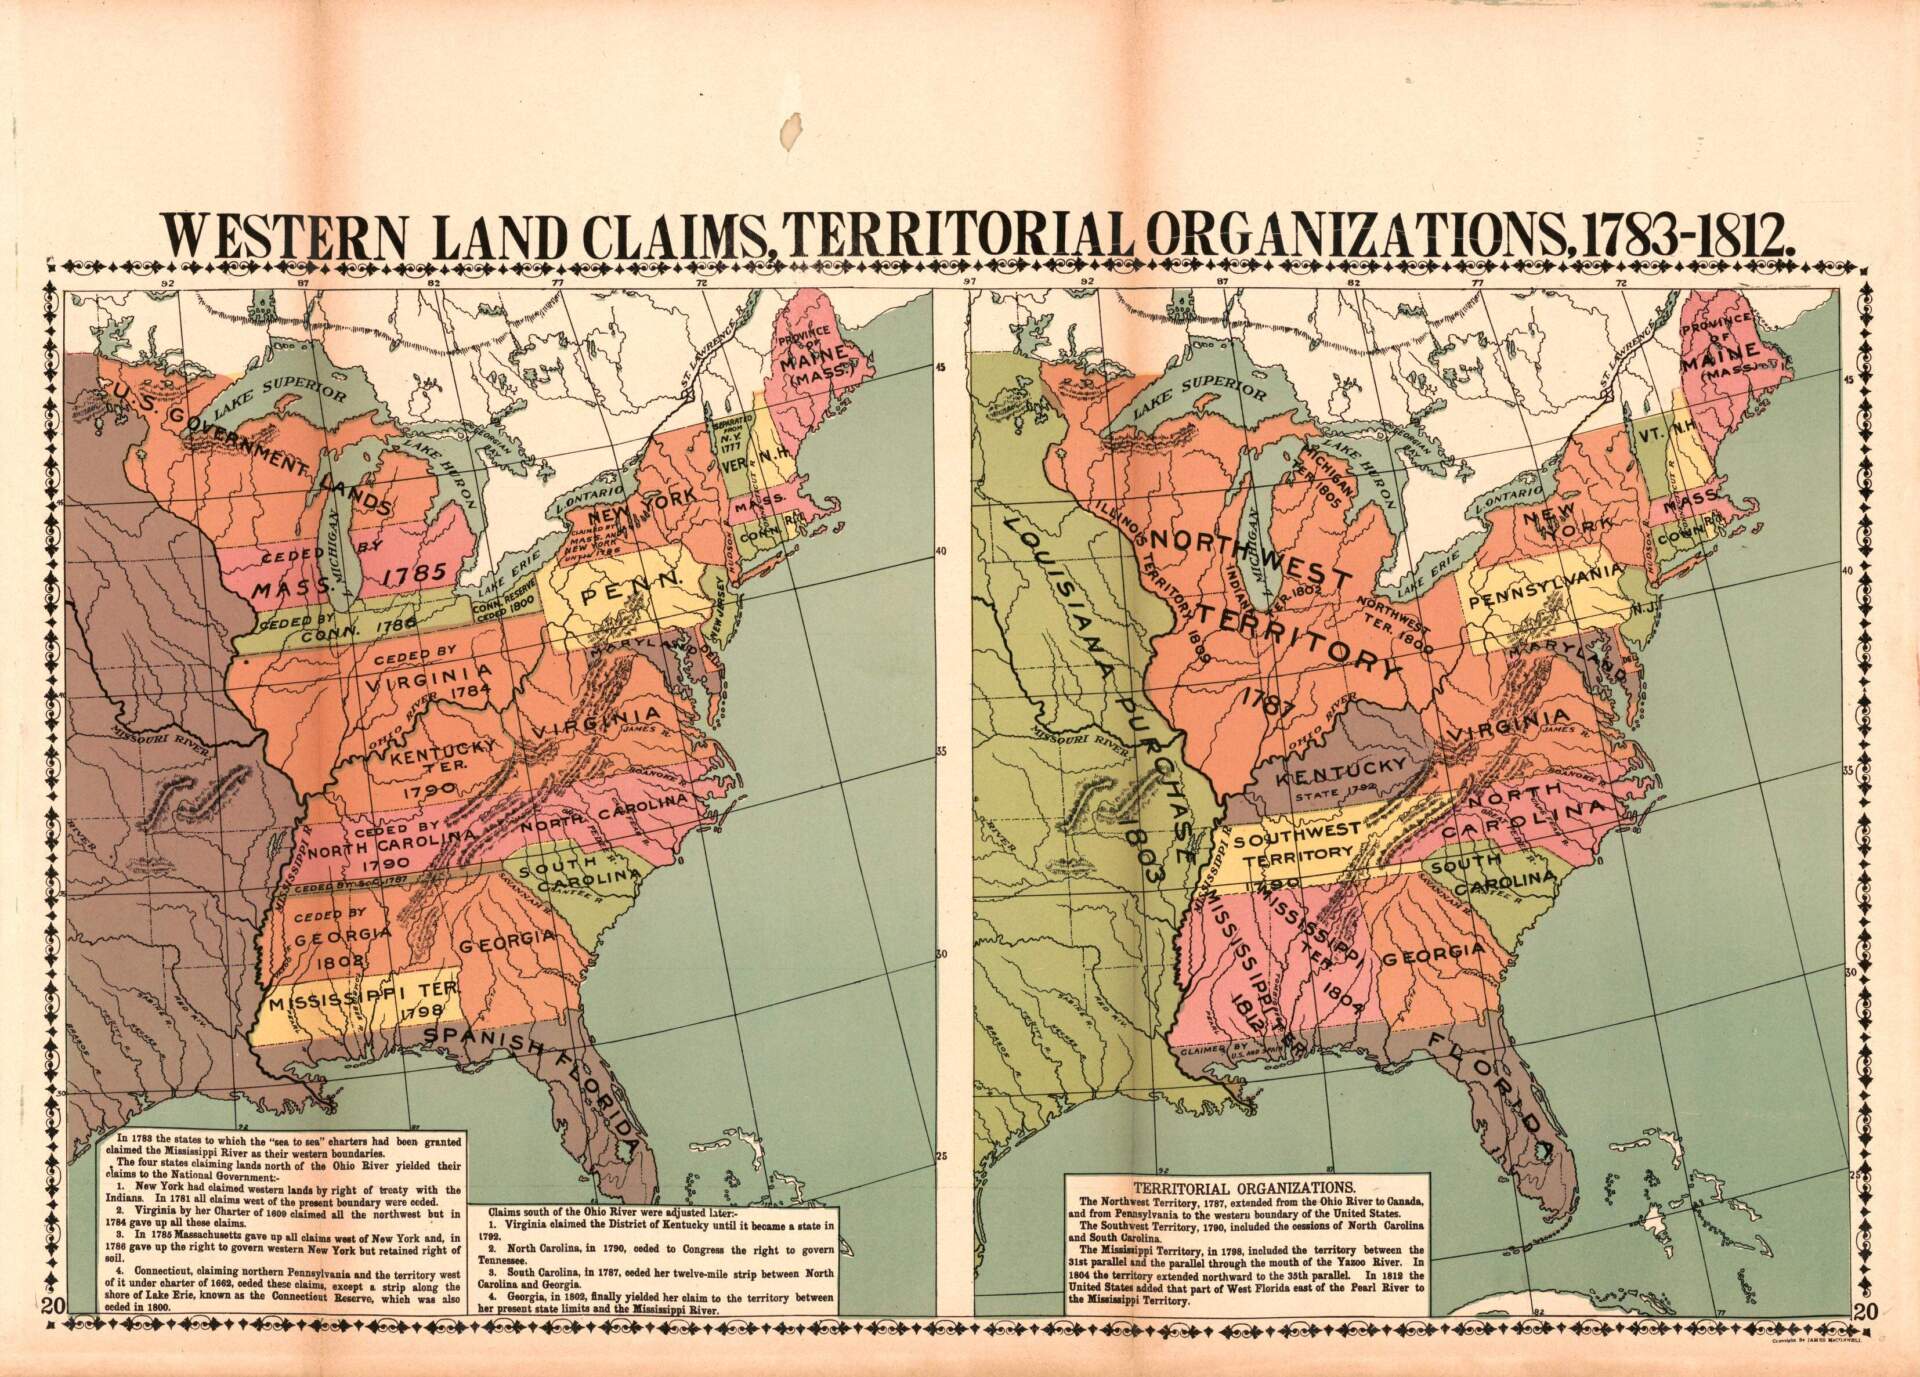 This map shows the claims Massachusetts and other nascent states made in the Northwest Territory after the Revolutionary War. By 1812, all of the land was ceded to the federal government. (Map courtesy of the Library of Congress)